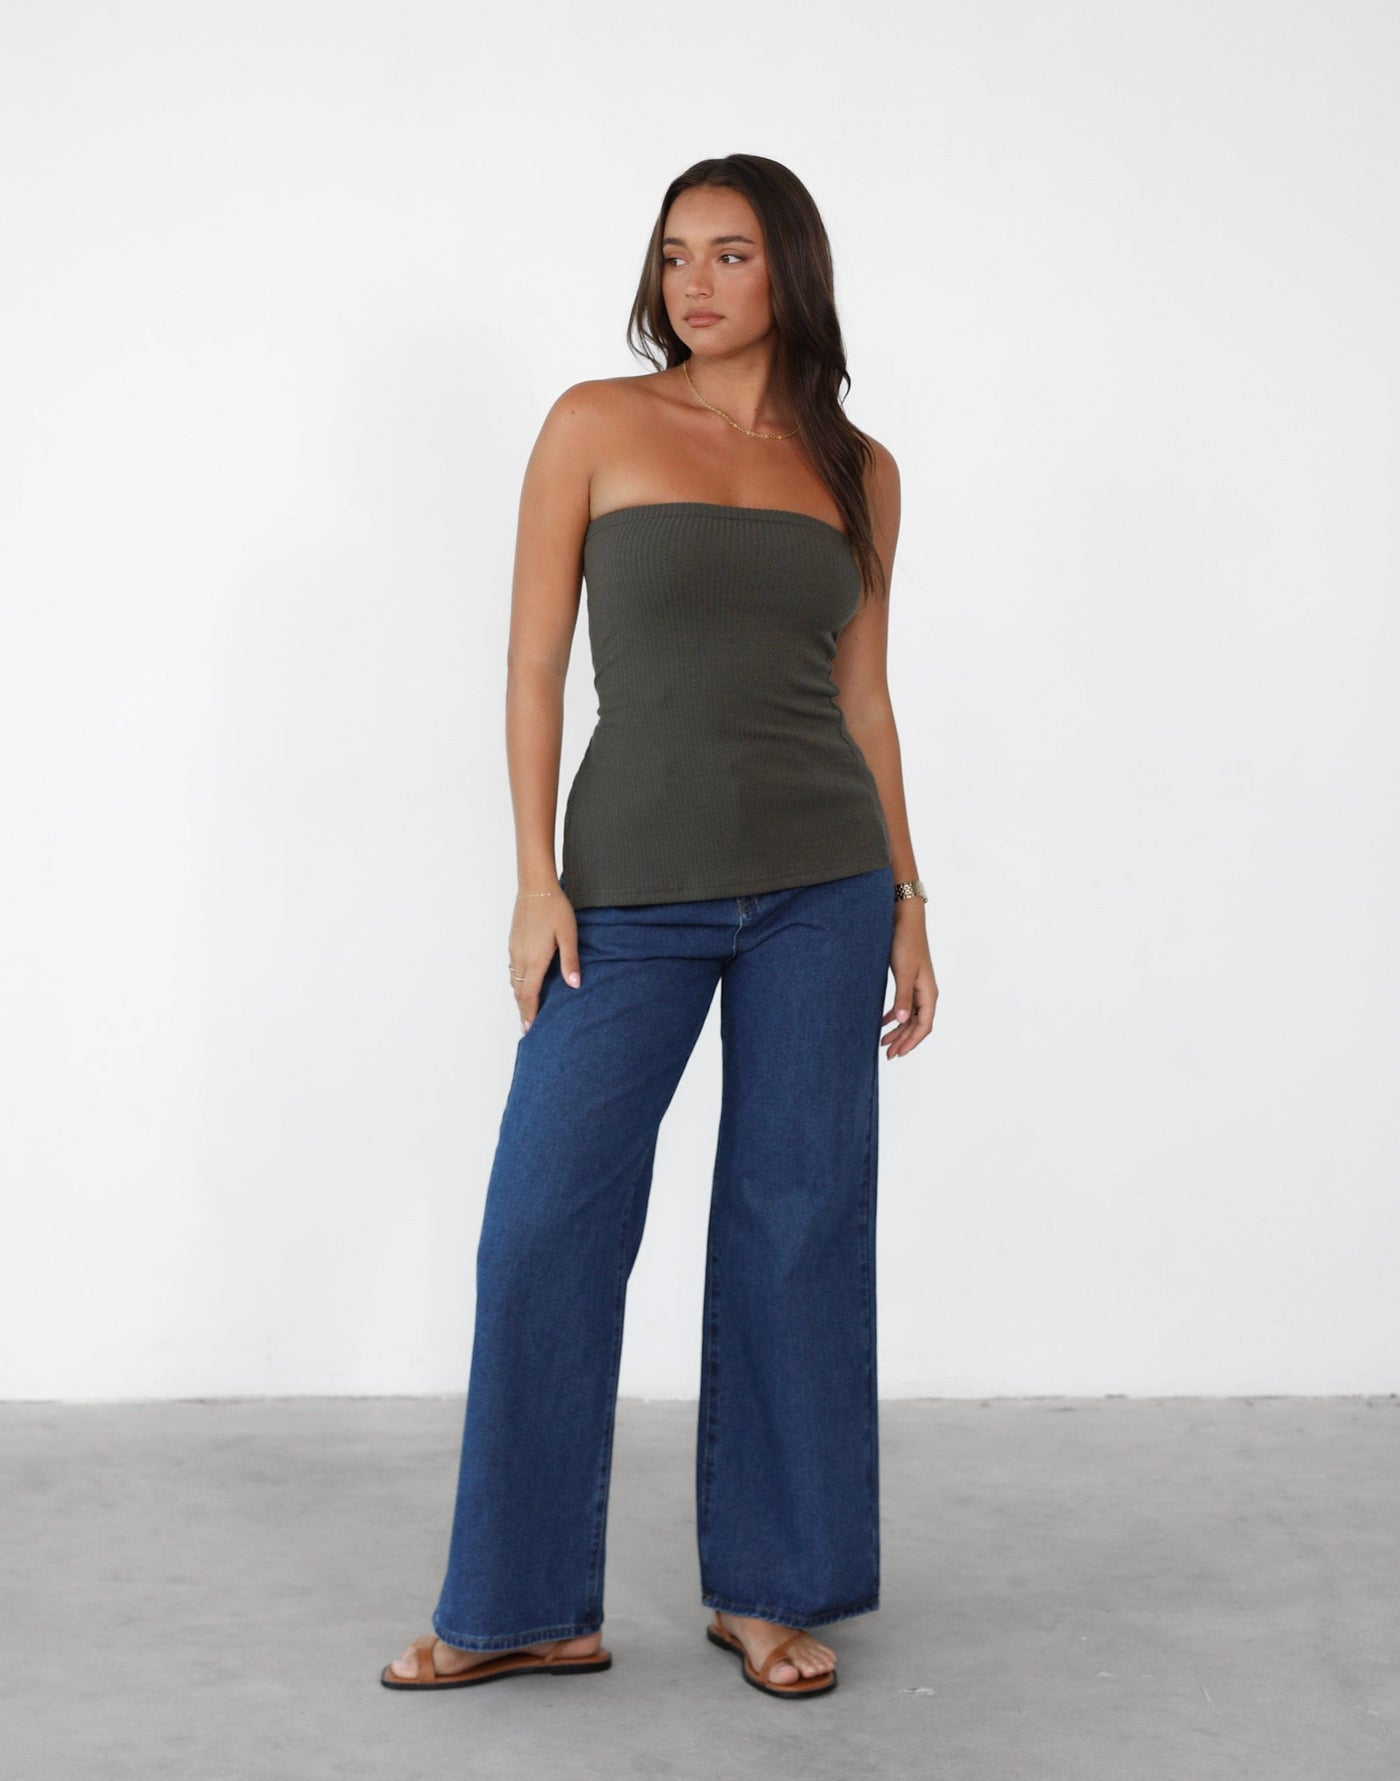 Tinah Jeans (Indigo) | High Waisted Straight Leg Jeans - Women's Pants - Charcoal Clothing